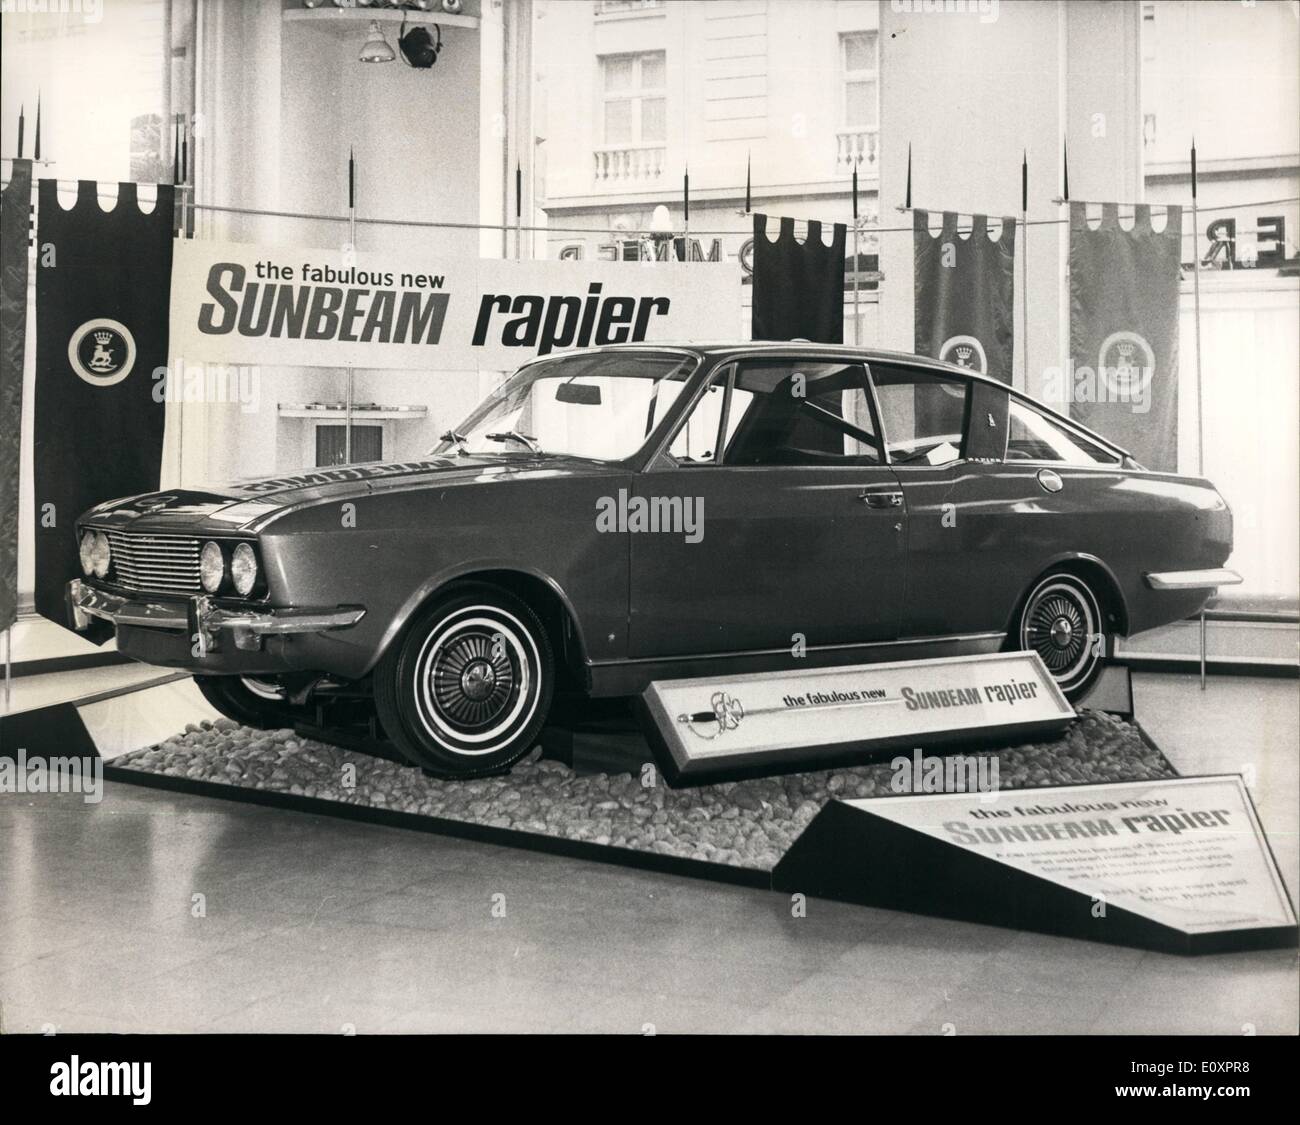 Oct. 10, 1967 - The new sunbeam Rapier. A completely new sunbeam rapier with a top speed capability of around 100 m.p.h, bold new fastback styling and a luxury 4/5 seater interior is the latest addition to the Rootes range for 1968. It's price is $ 1200. 3a. 9d. photo shows The new Sunbeam Rapier pictured today to Roote's Piccadilly showrooms. Stock Photo